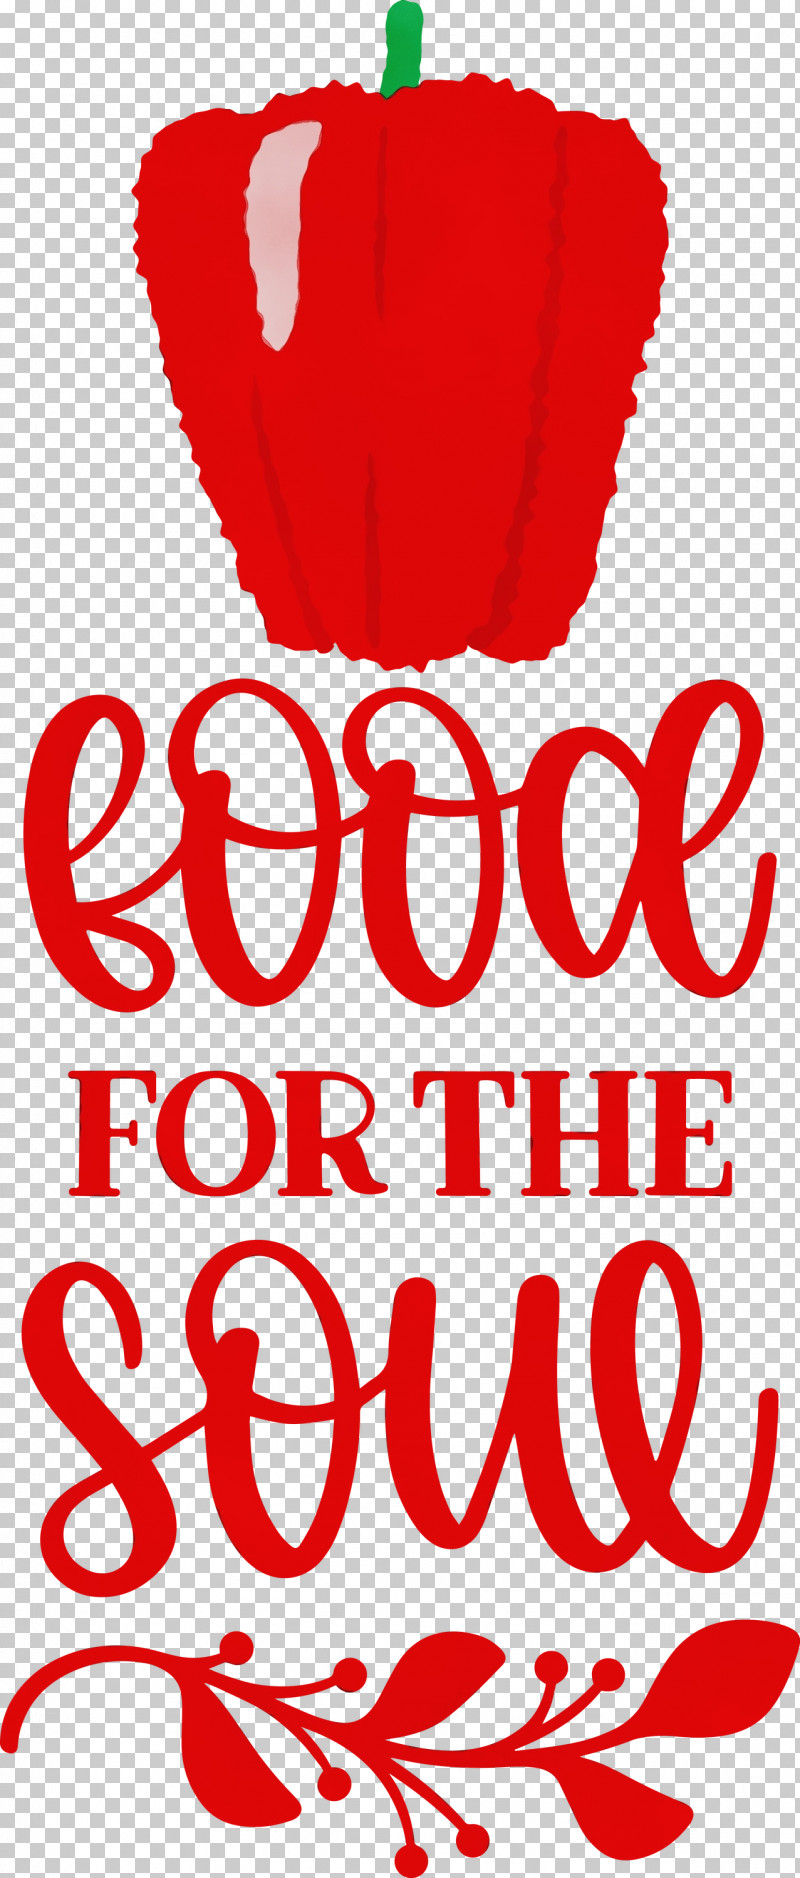 Royalty-free Poster Logo PNG, Clipart, Cooking, Food, Logo, Paint, Poster Free PNG Download